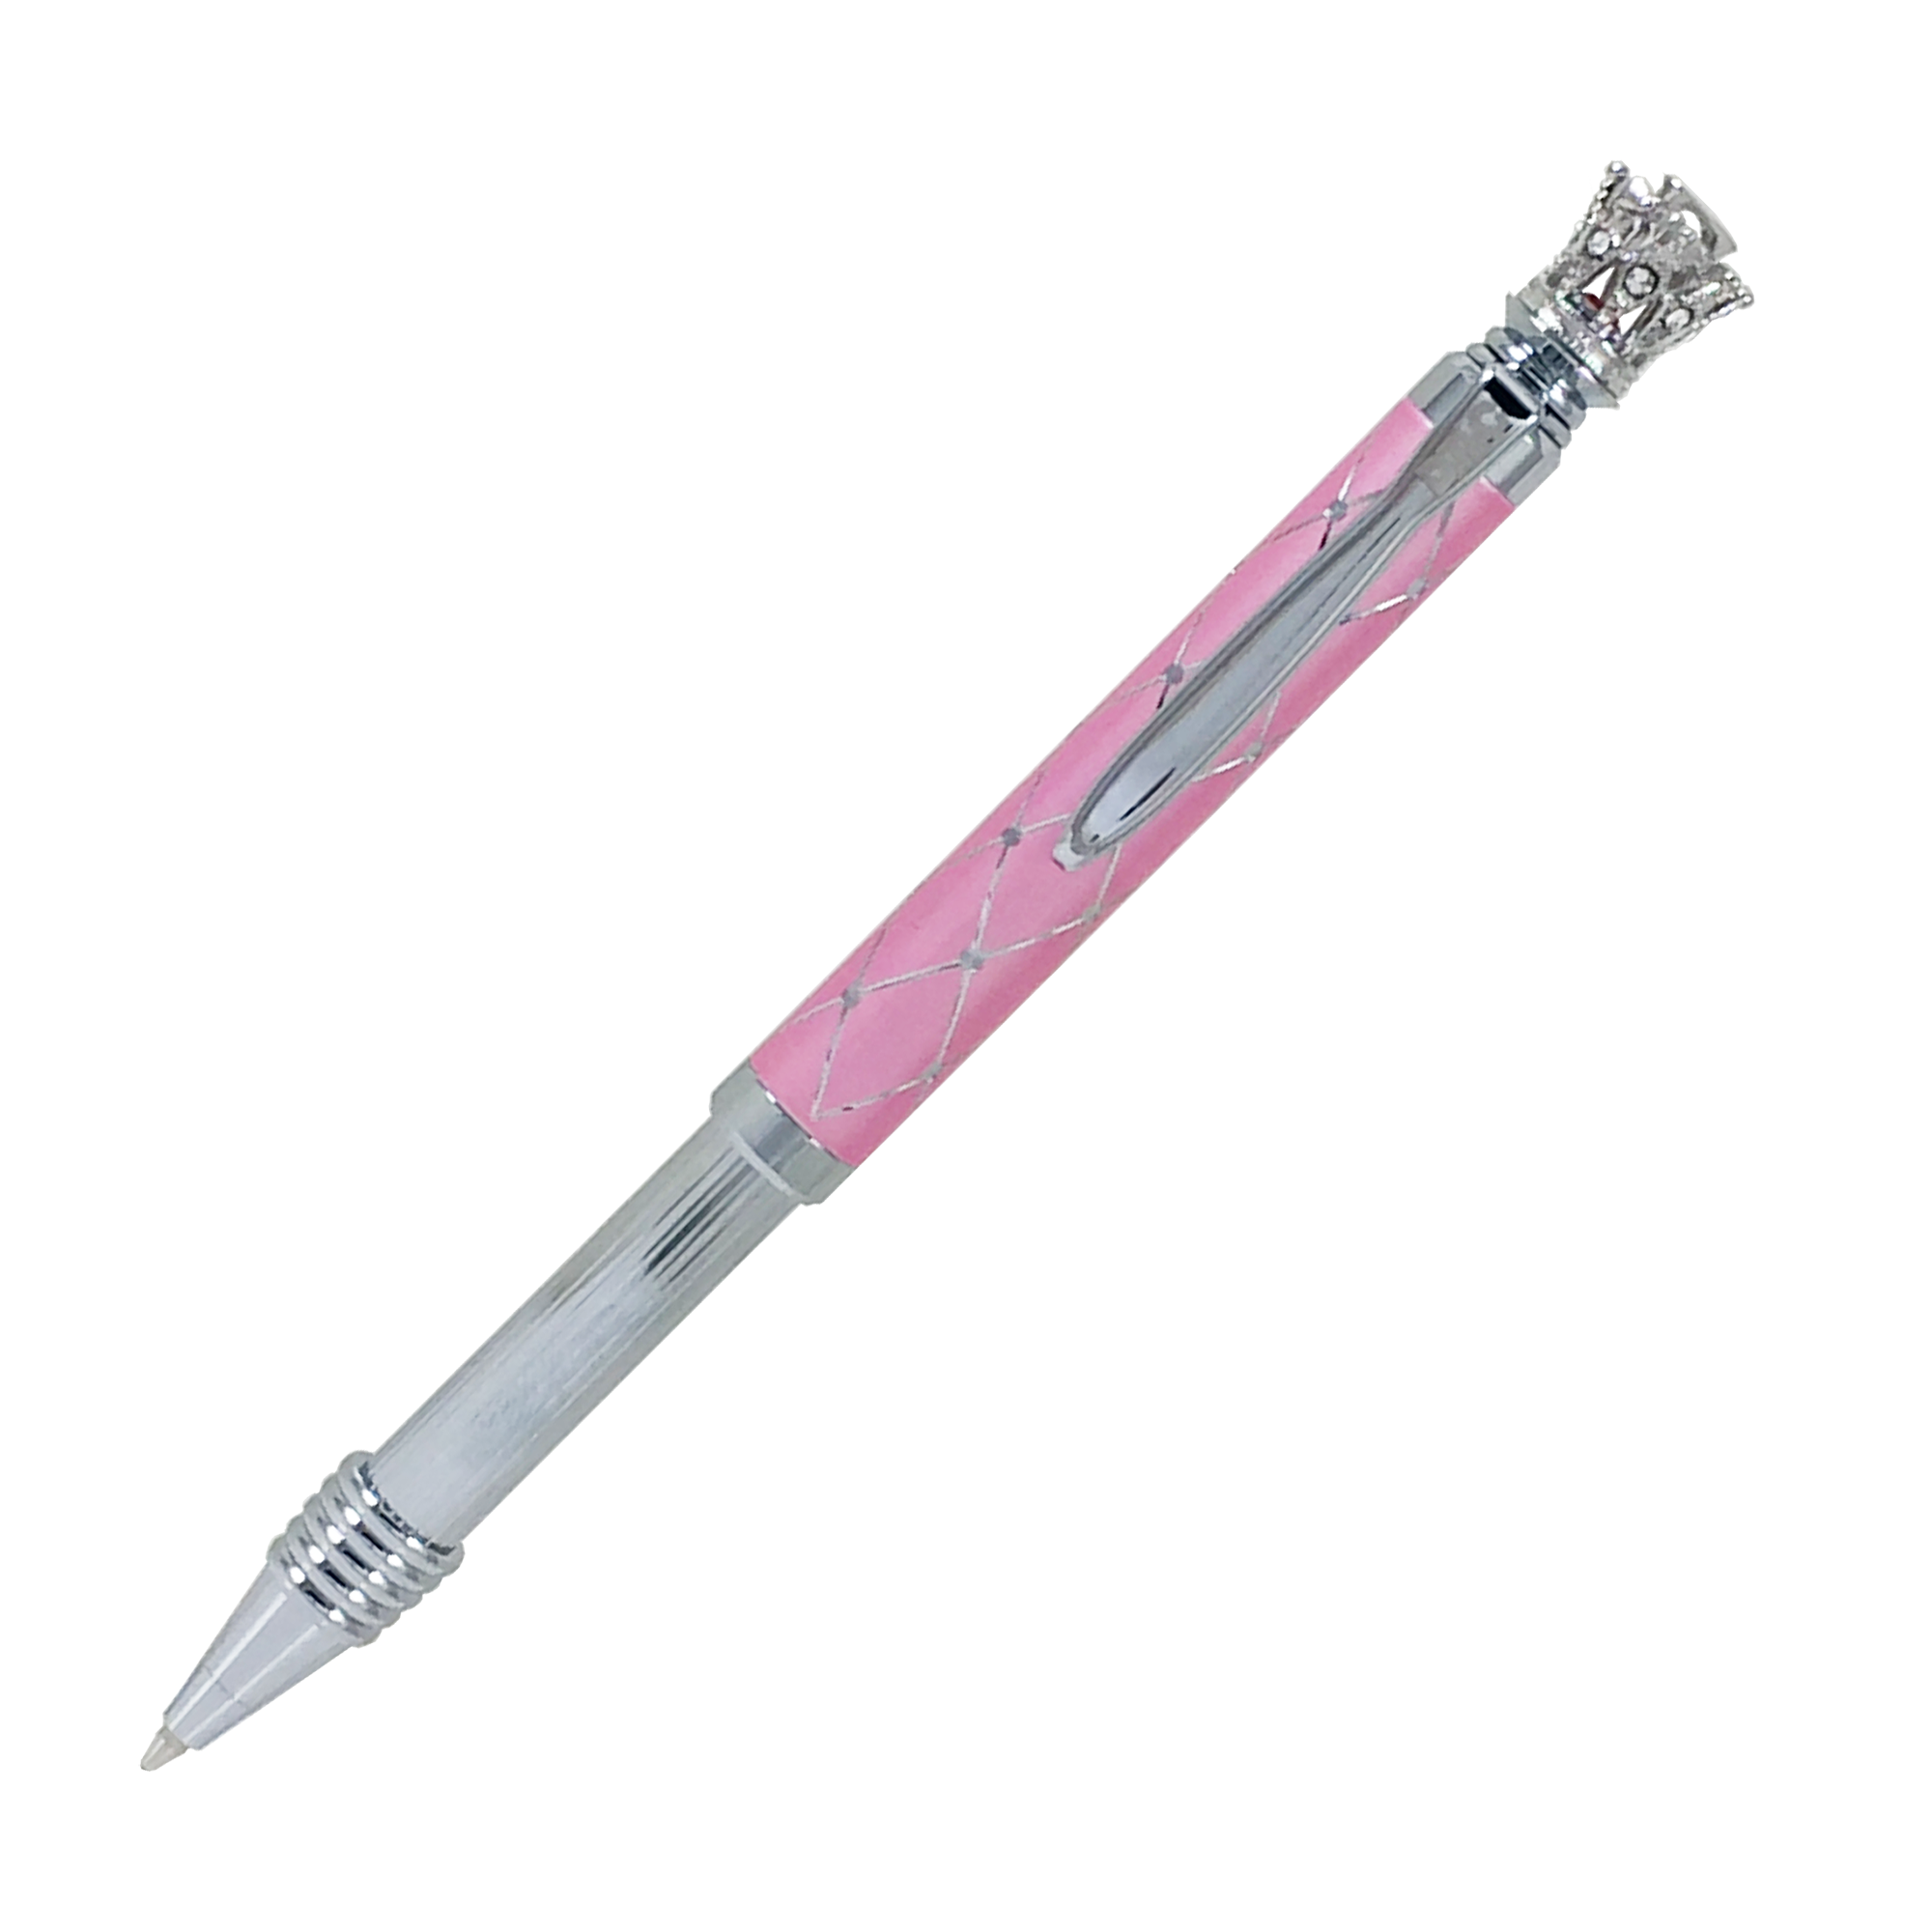 King Lanling Checked Queen Crown Pen